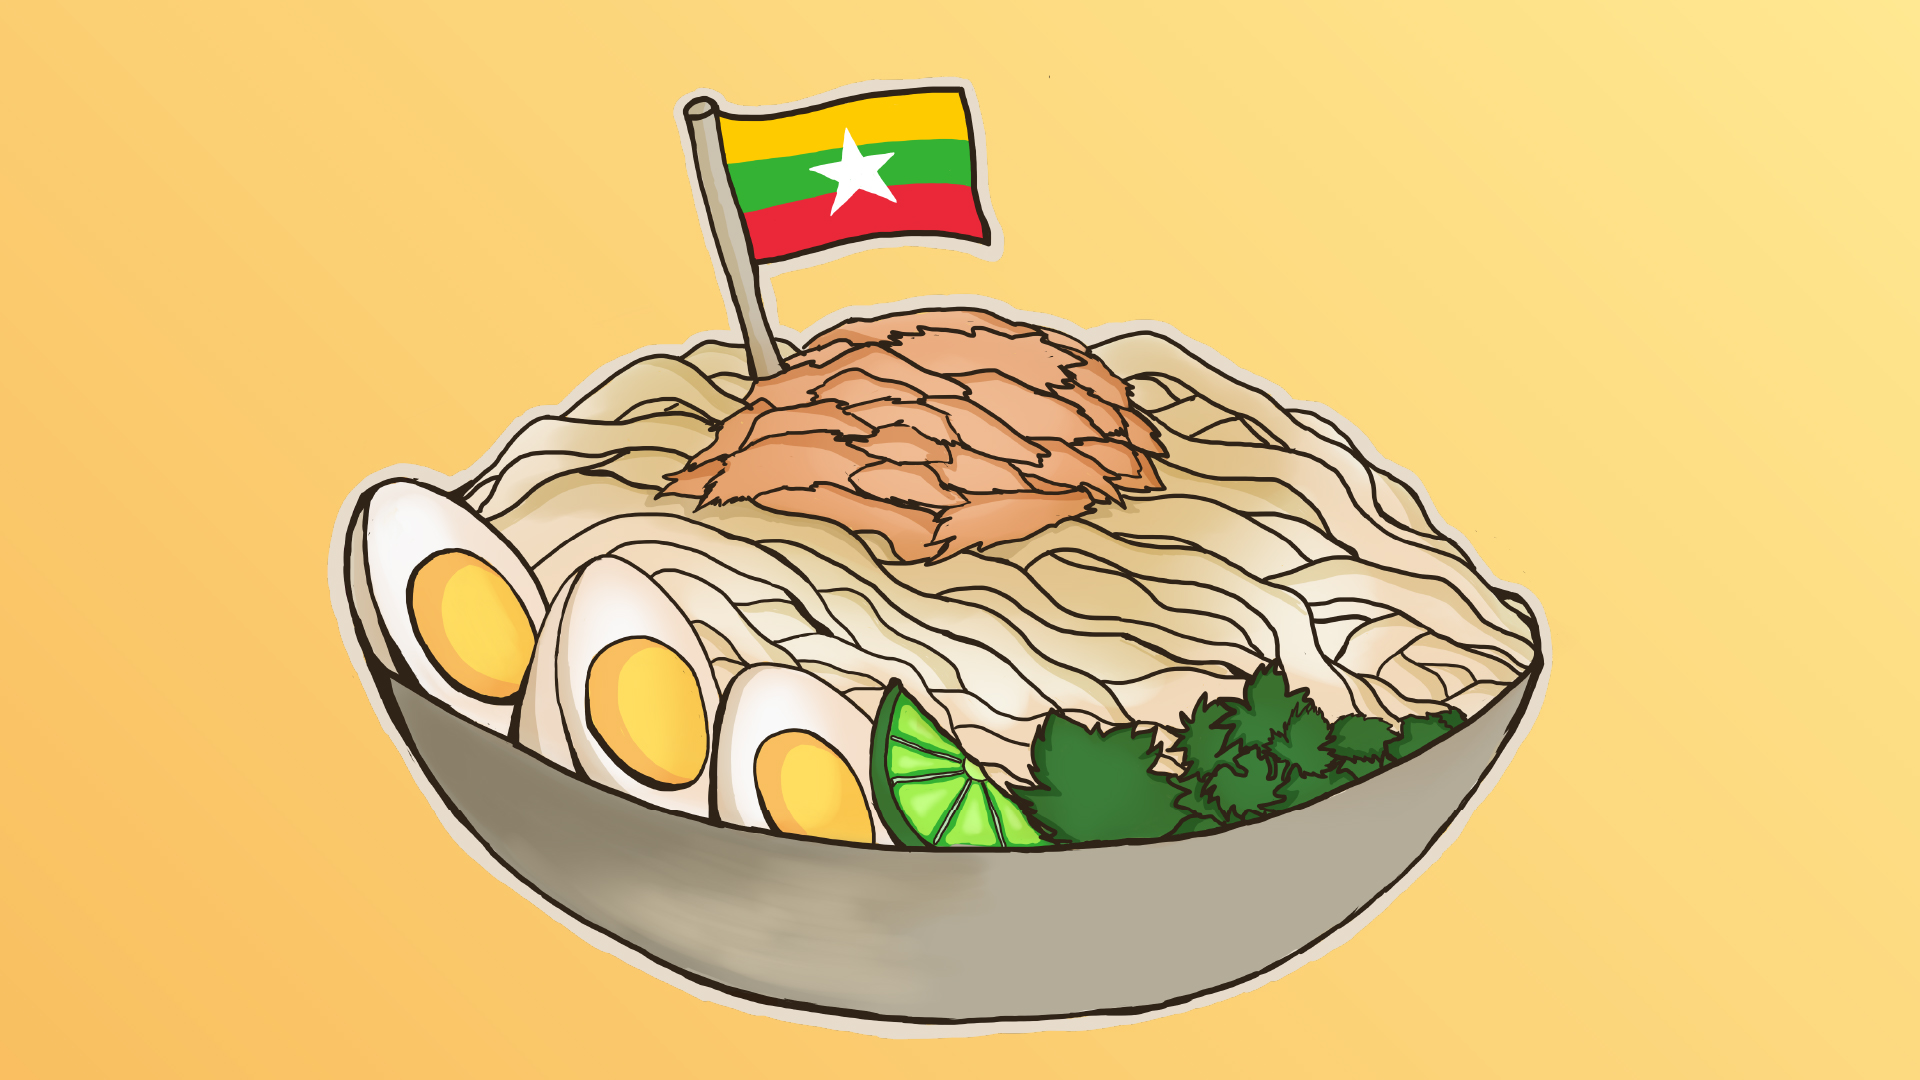 Nan gyi thoke, a burmese noodle dish with eggs, lime, and green herbs topped with chicken in a bowl with a small Myanmar flag stuck in the dish.